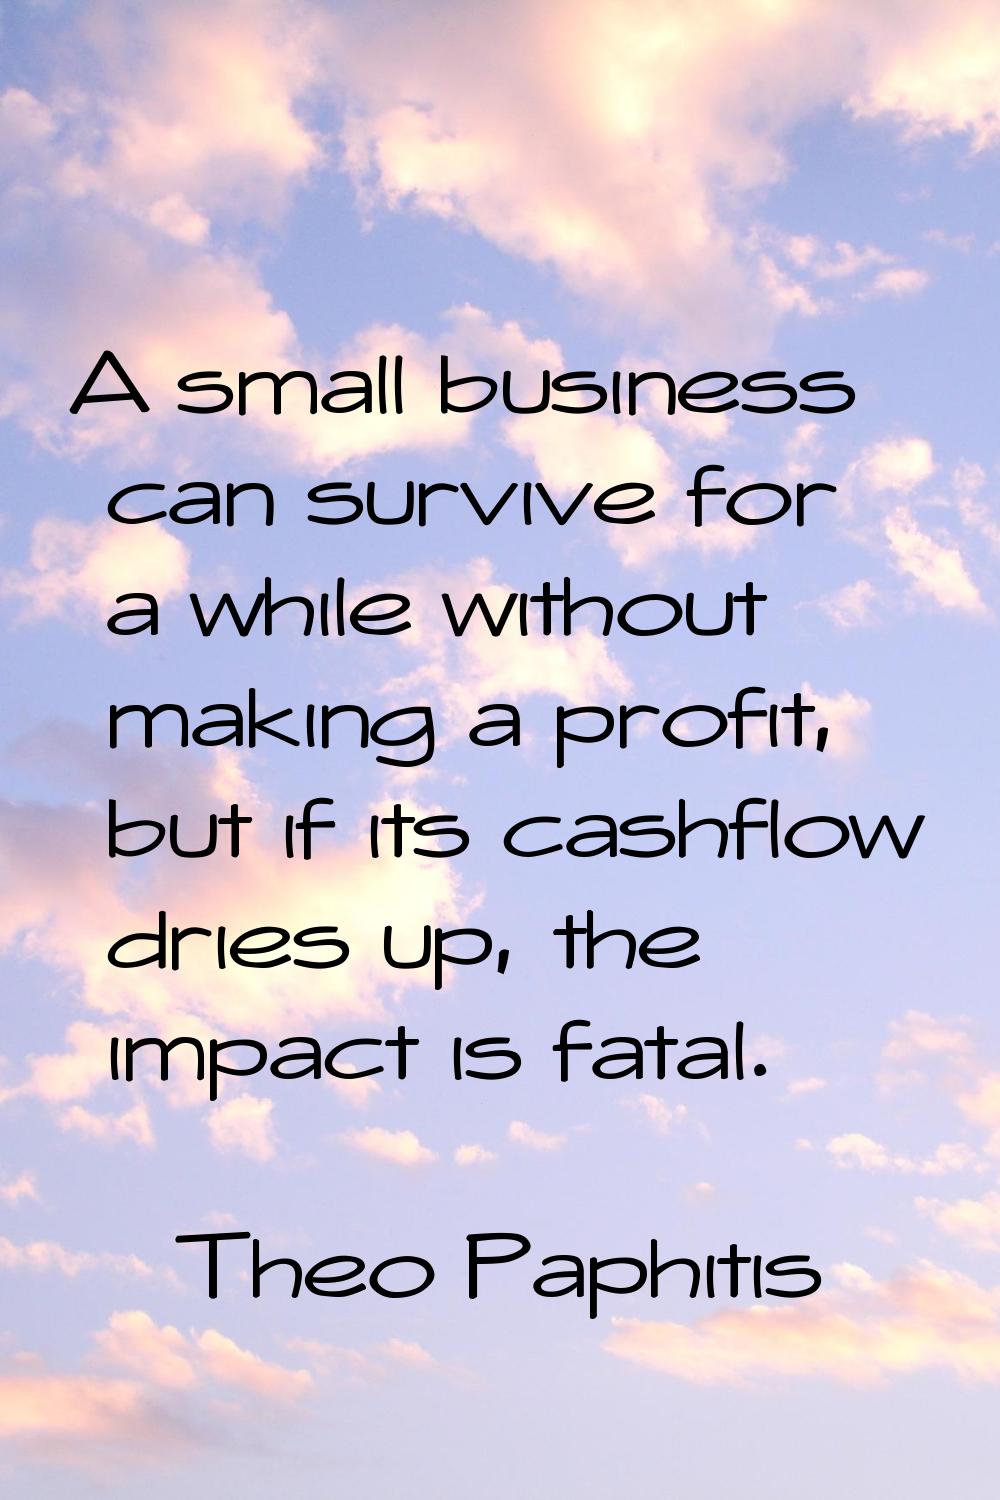 A small business can survive for a while without making a profit, but if its cashflow dries up, the